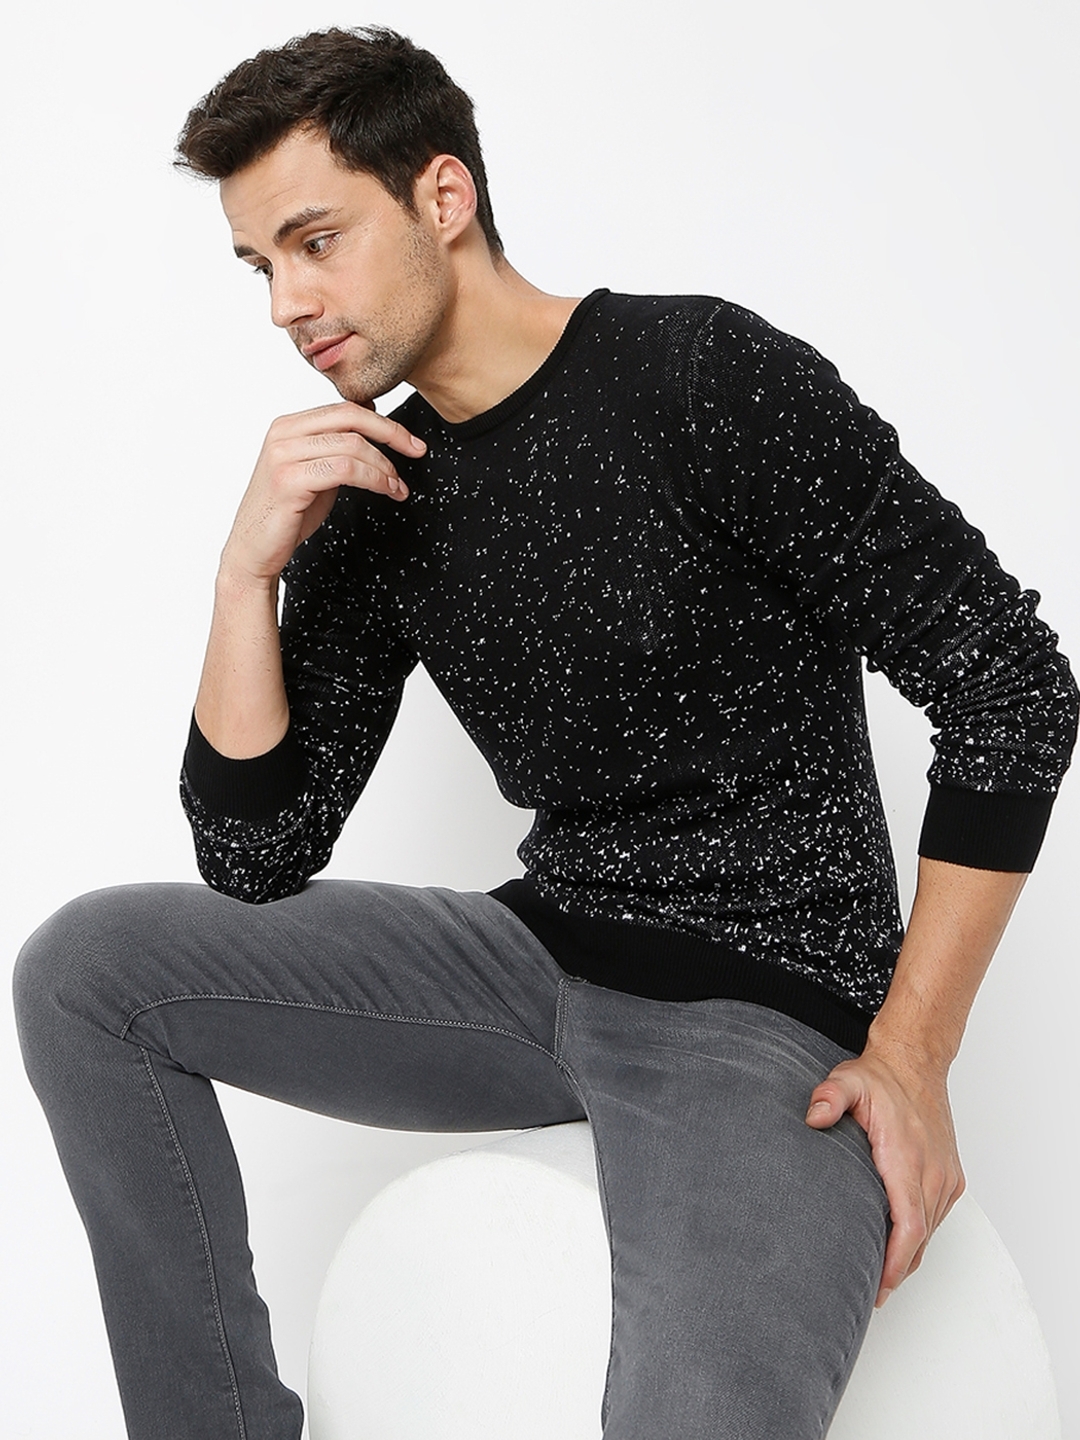 Men's KRISTO IN knitted slim fit sweater